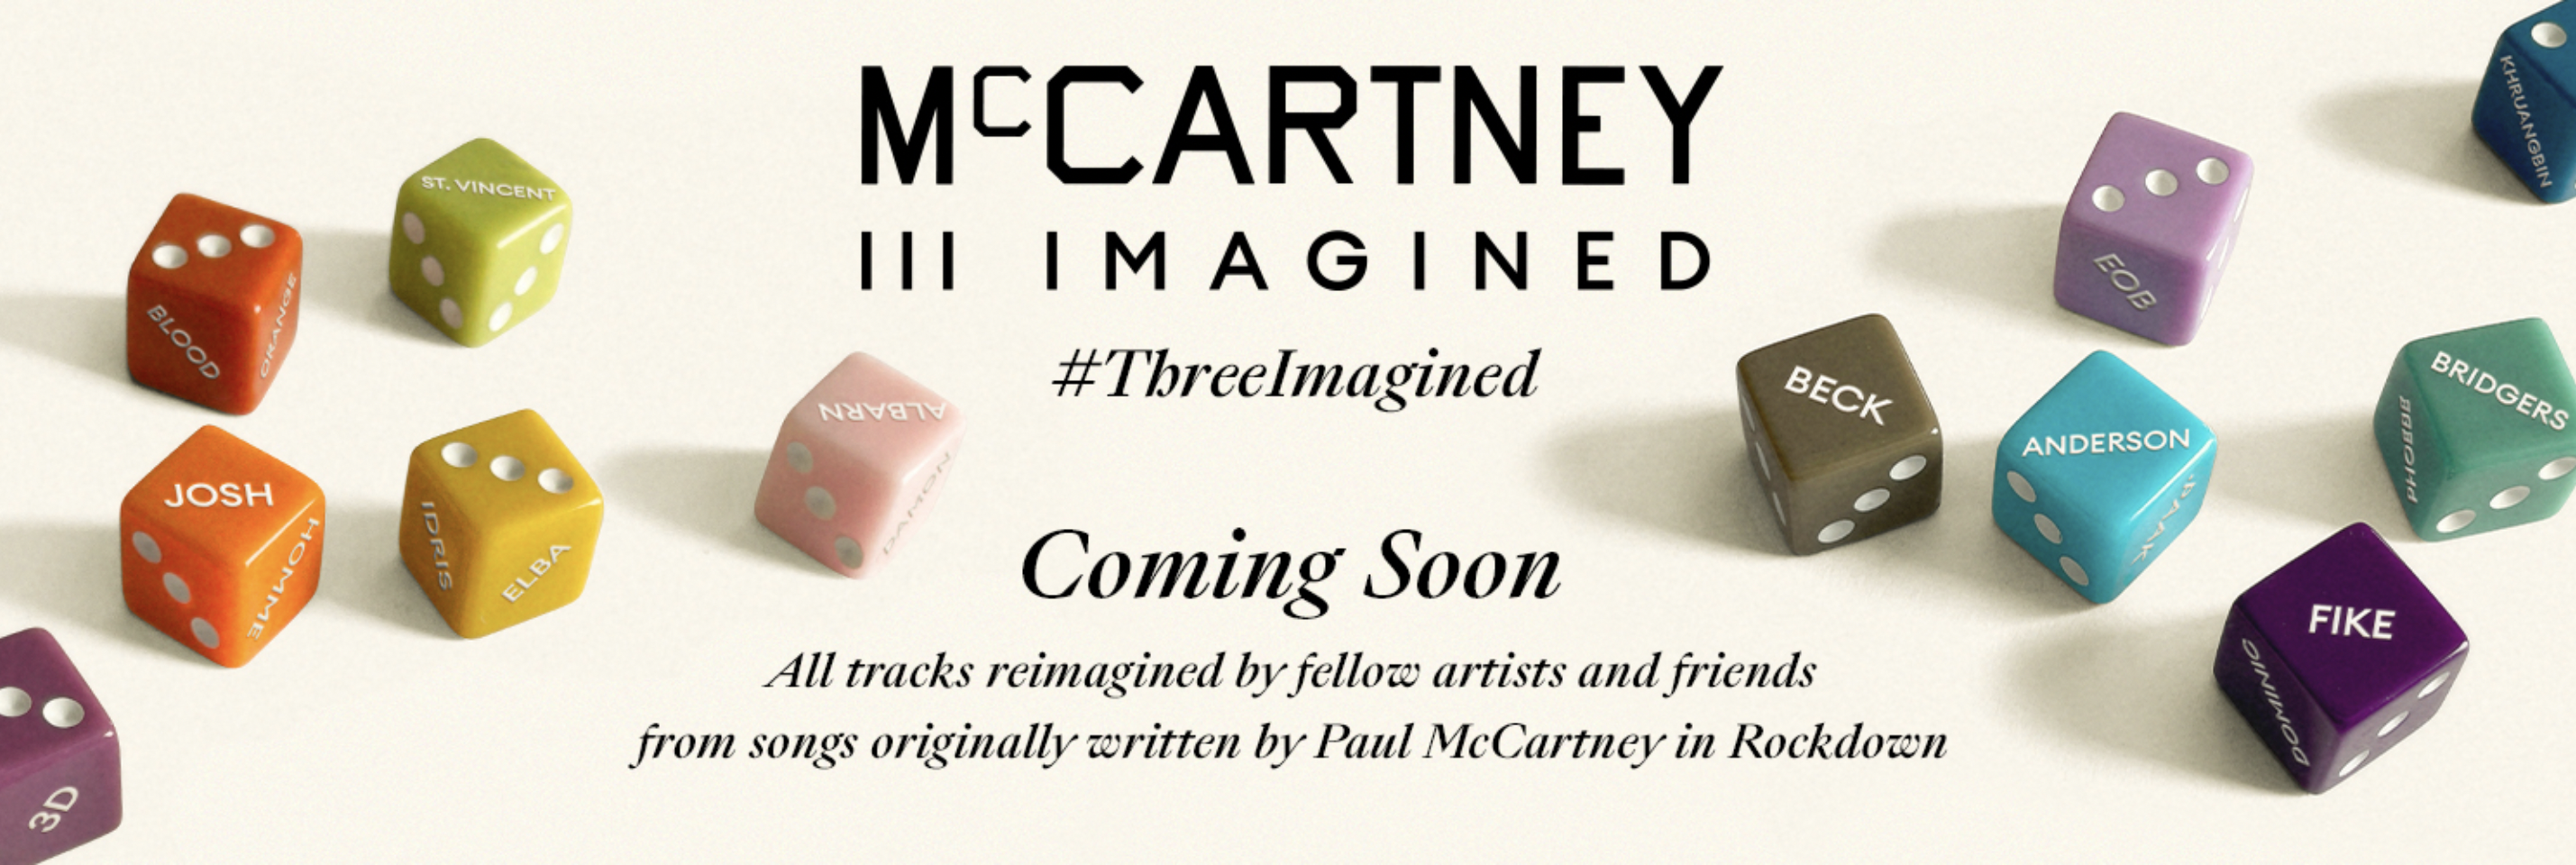 Paul McCartney is releasing a collection of cover songs by famous faces reimagining his 2020 album